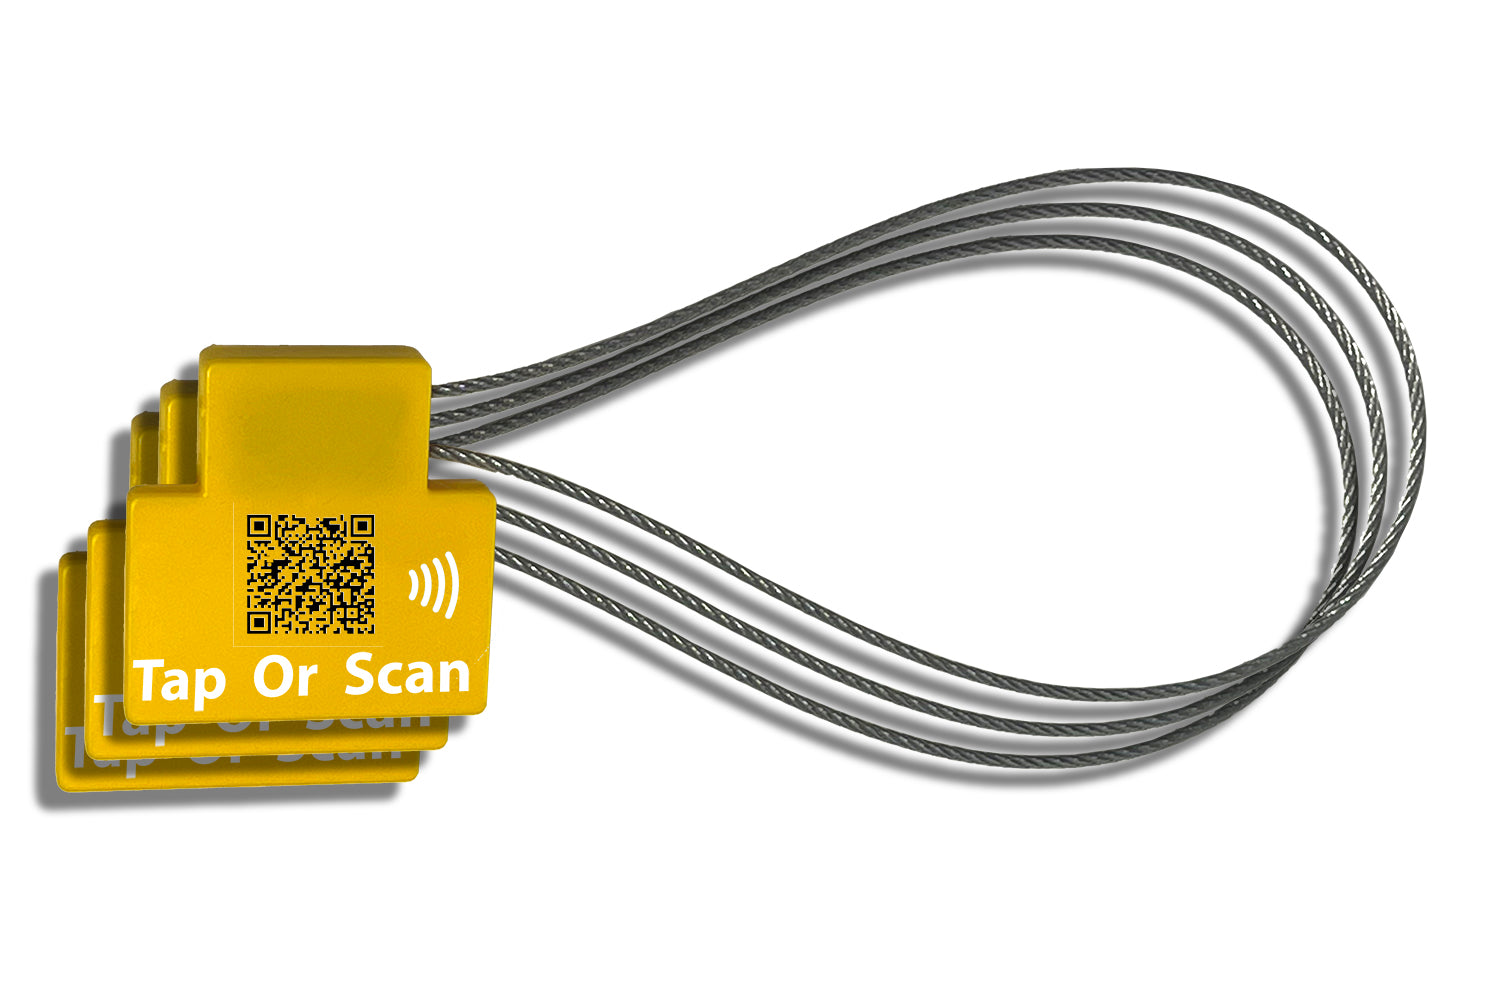 NFC Tag Βαλίτσας, με QR Code, Σετ 3 τεμαχίων